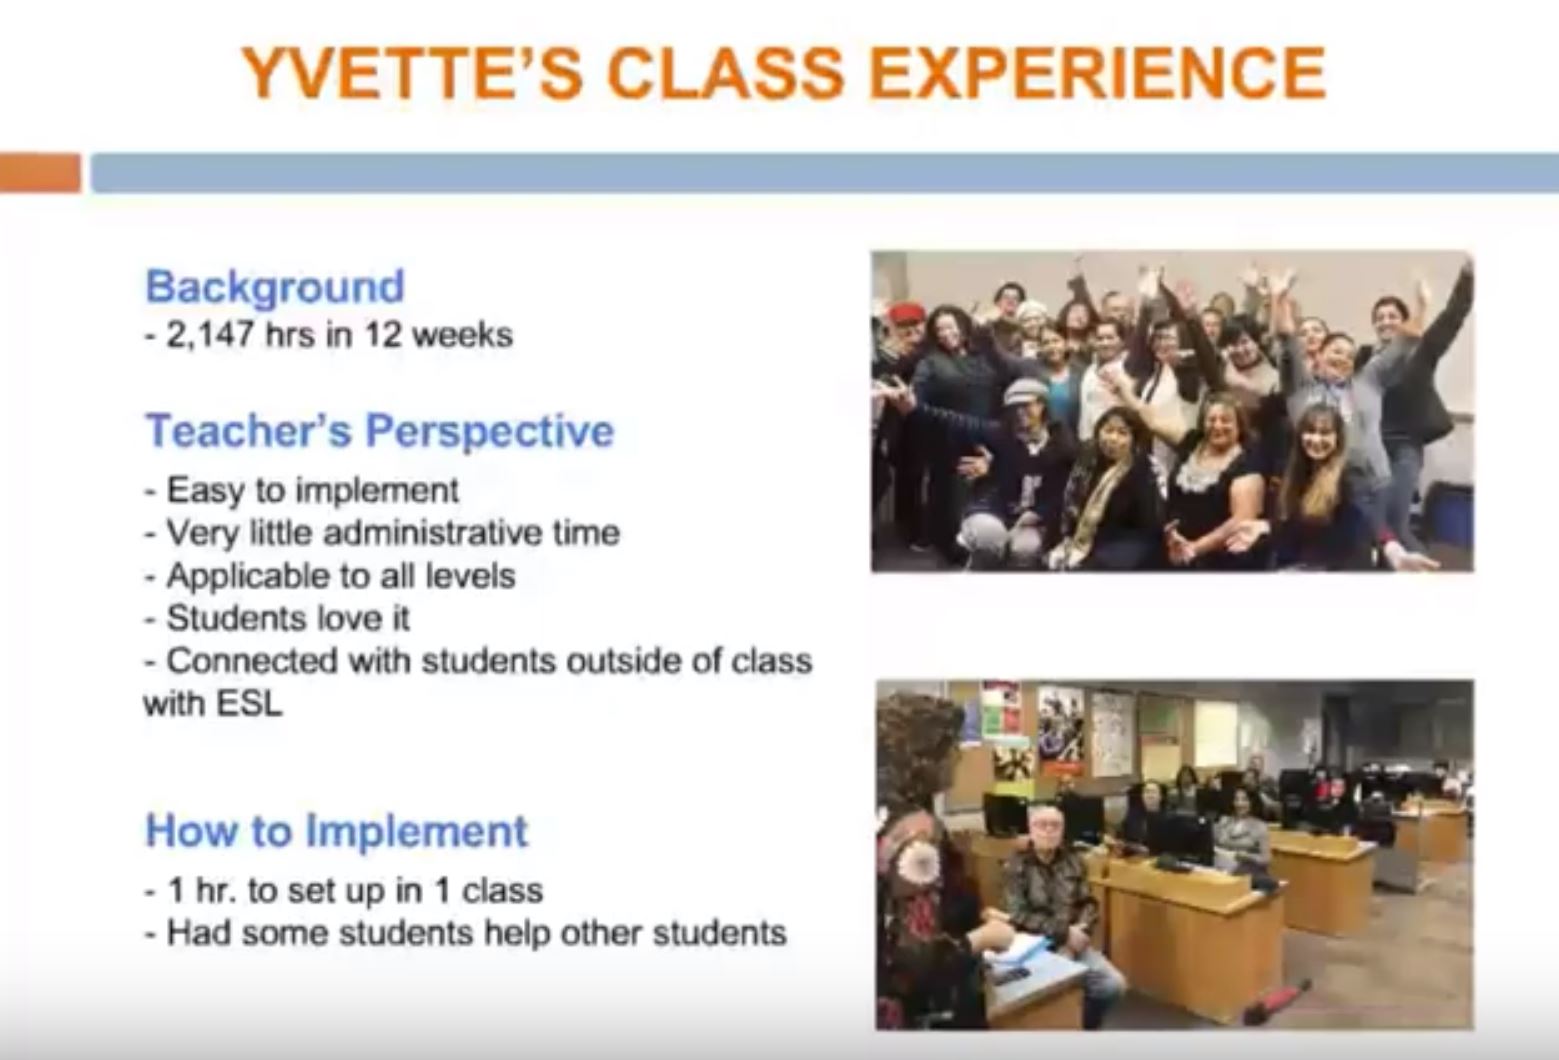 Yvette's class experience